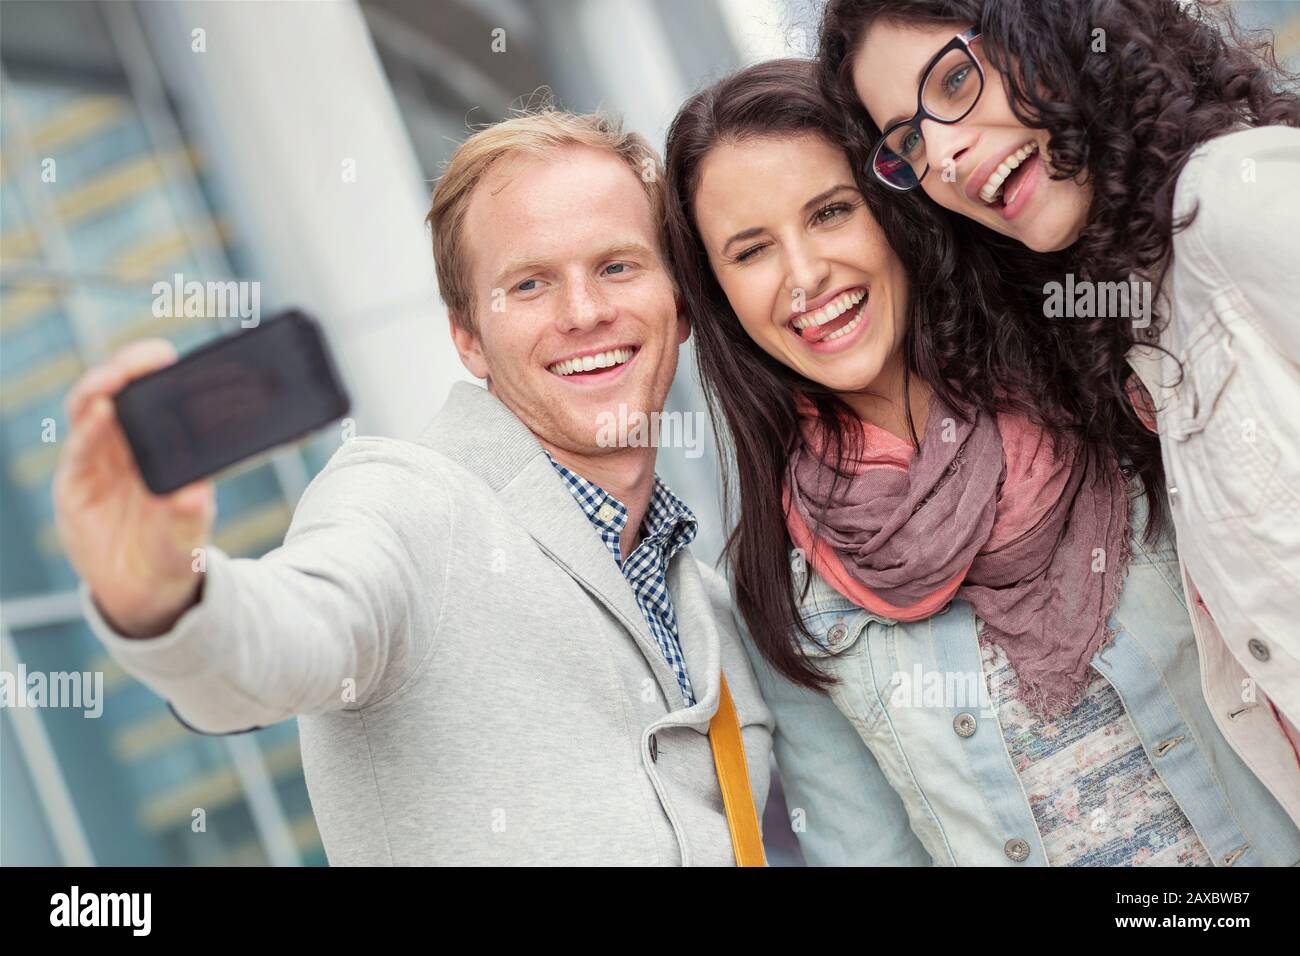 Playful young friends taking selfie with camera phone Stock Photo